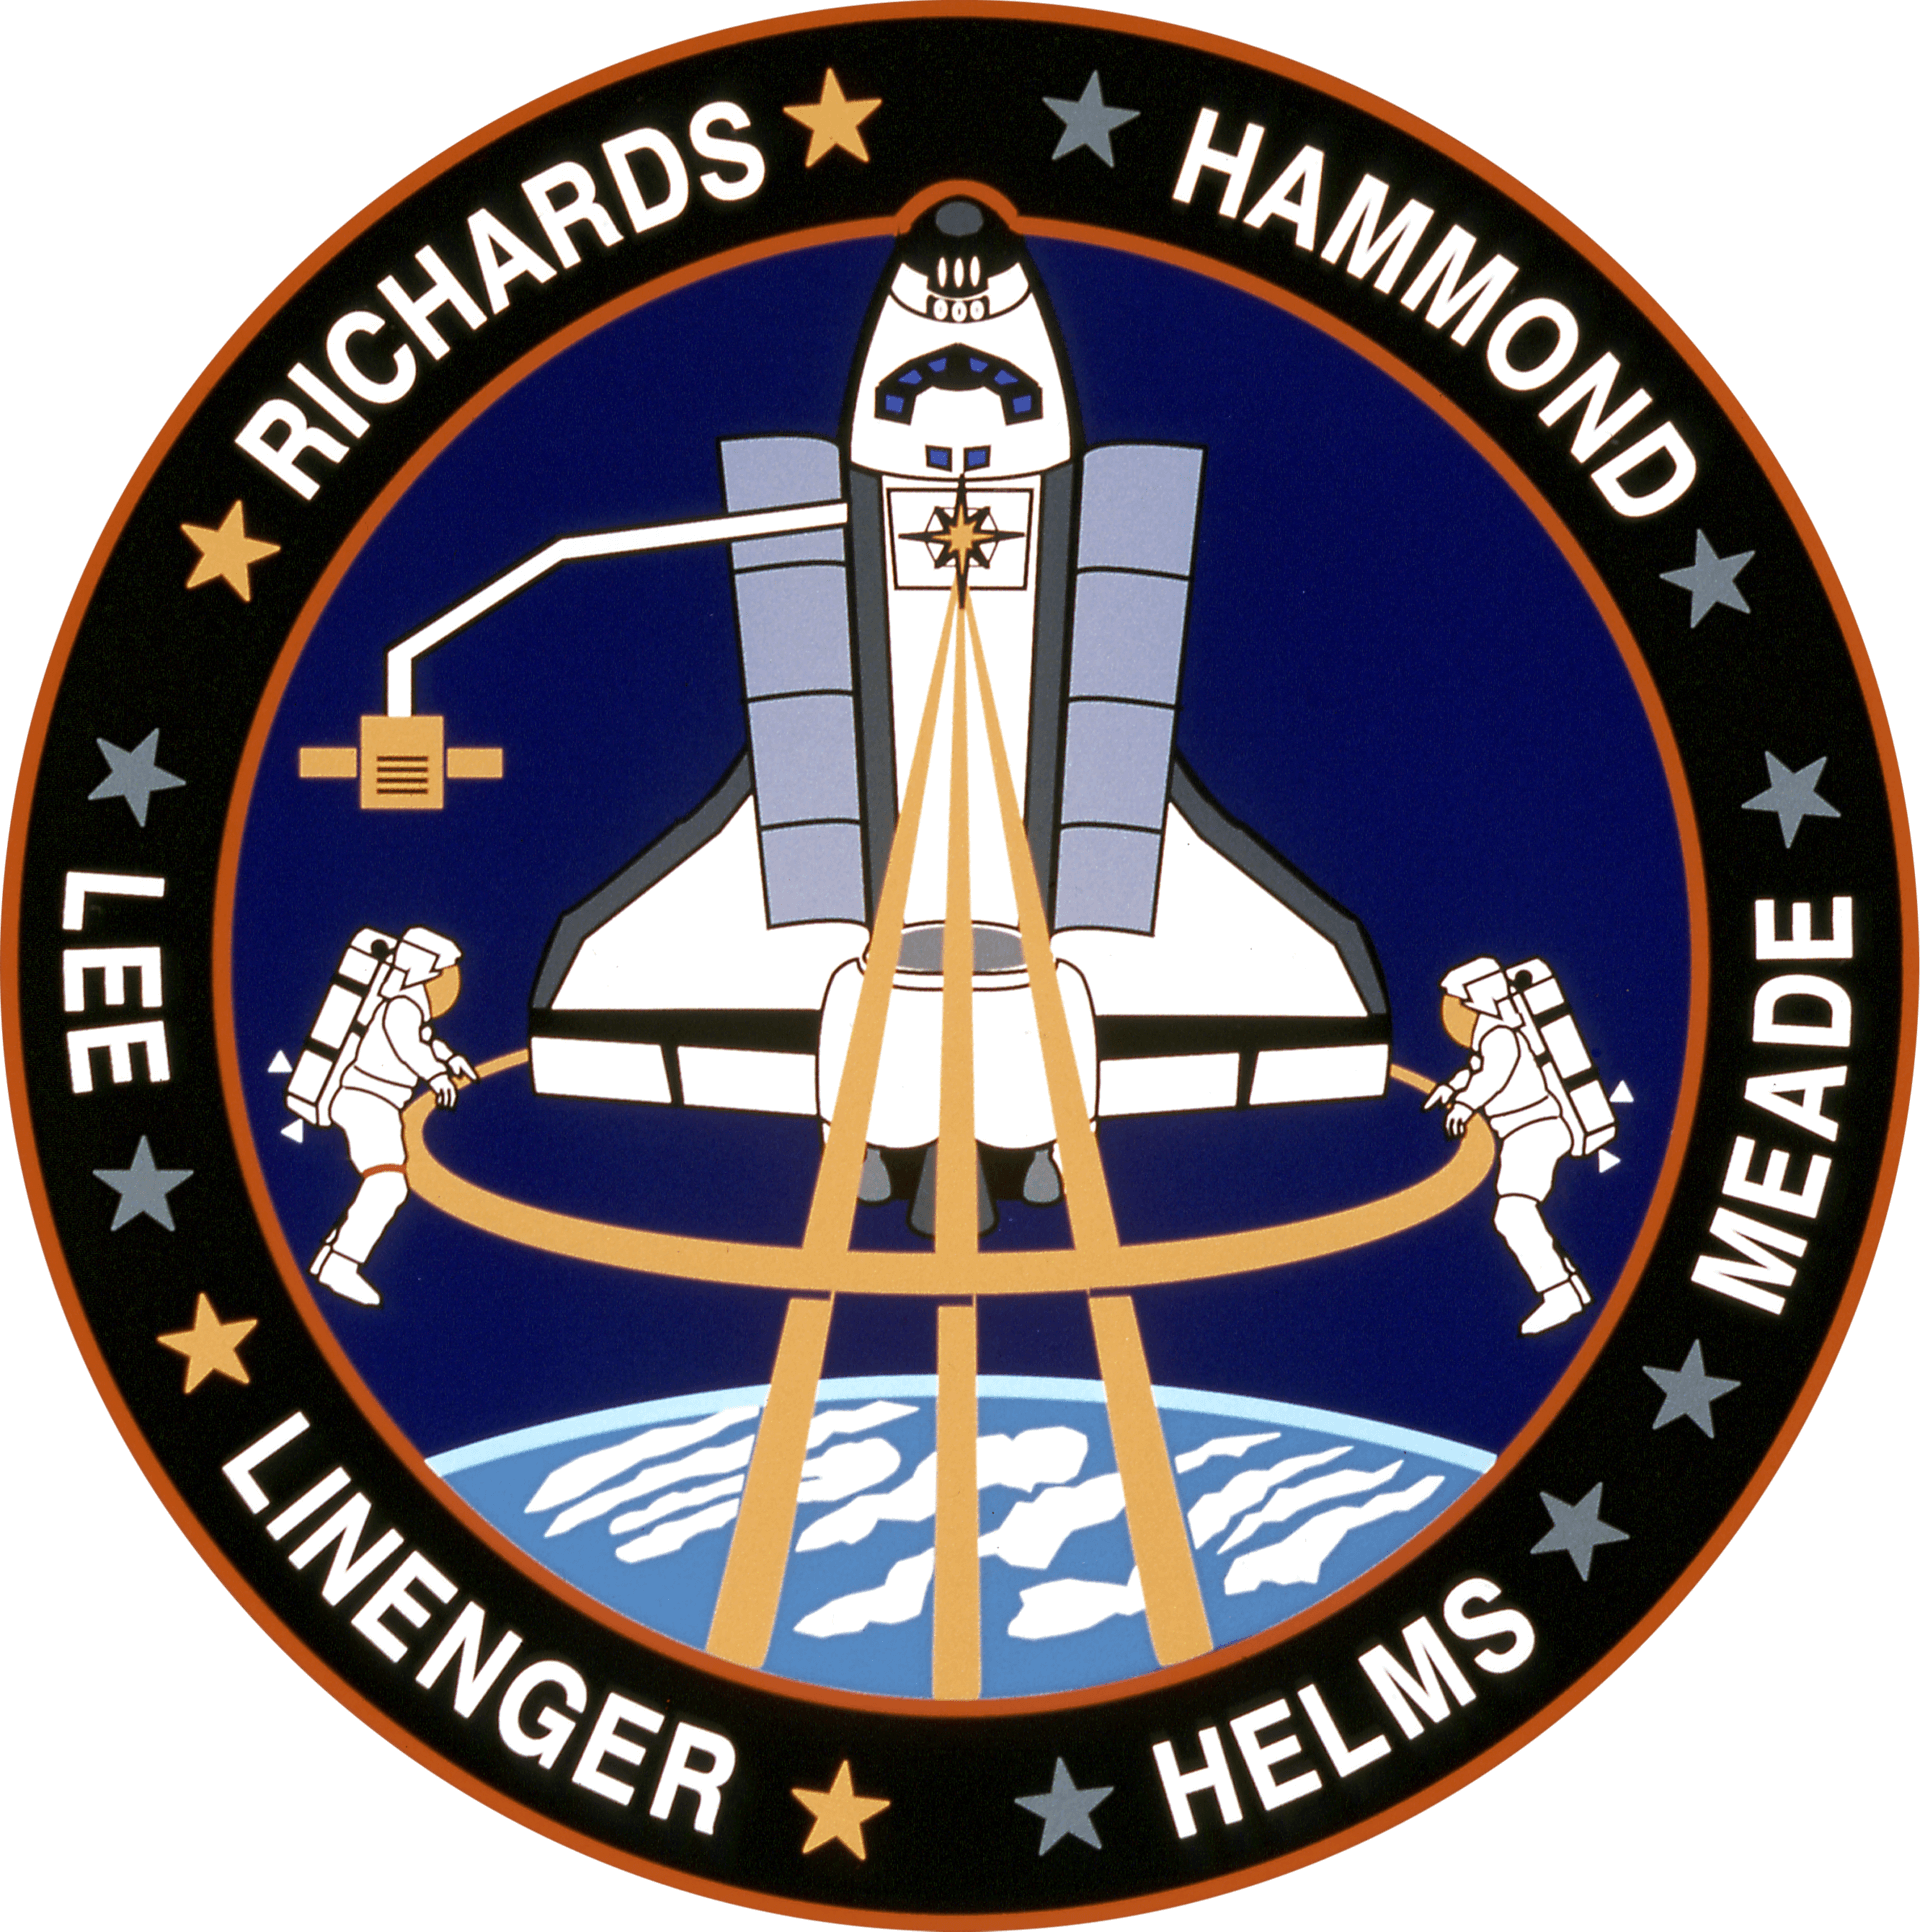 STS-64